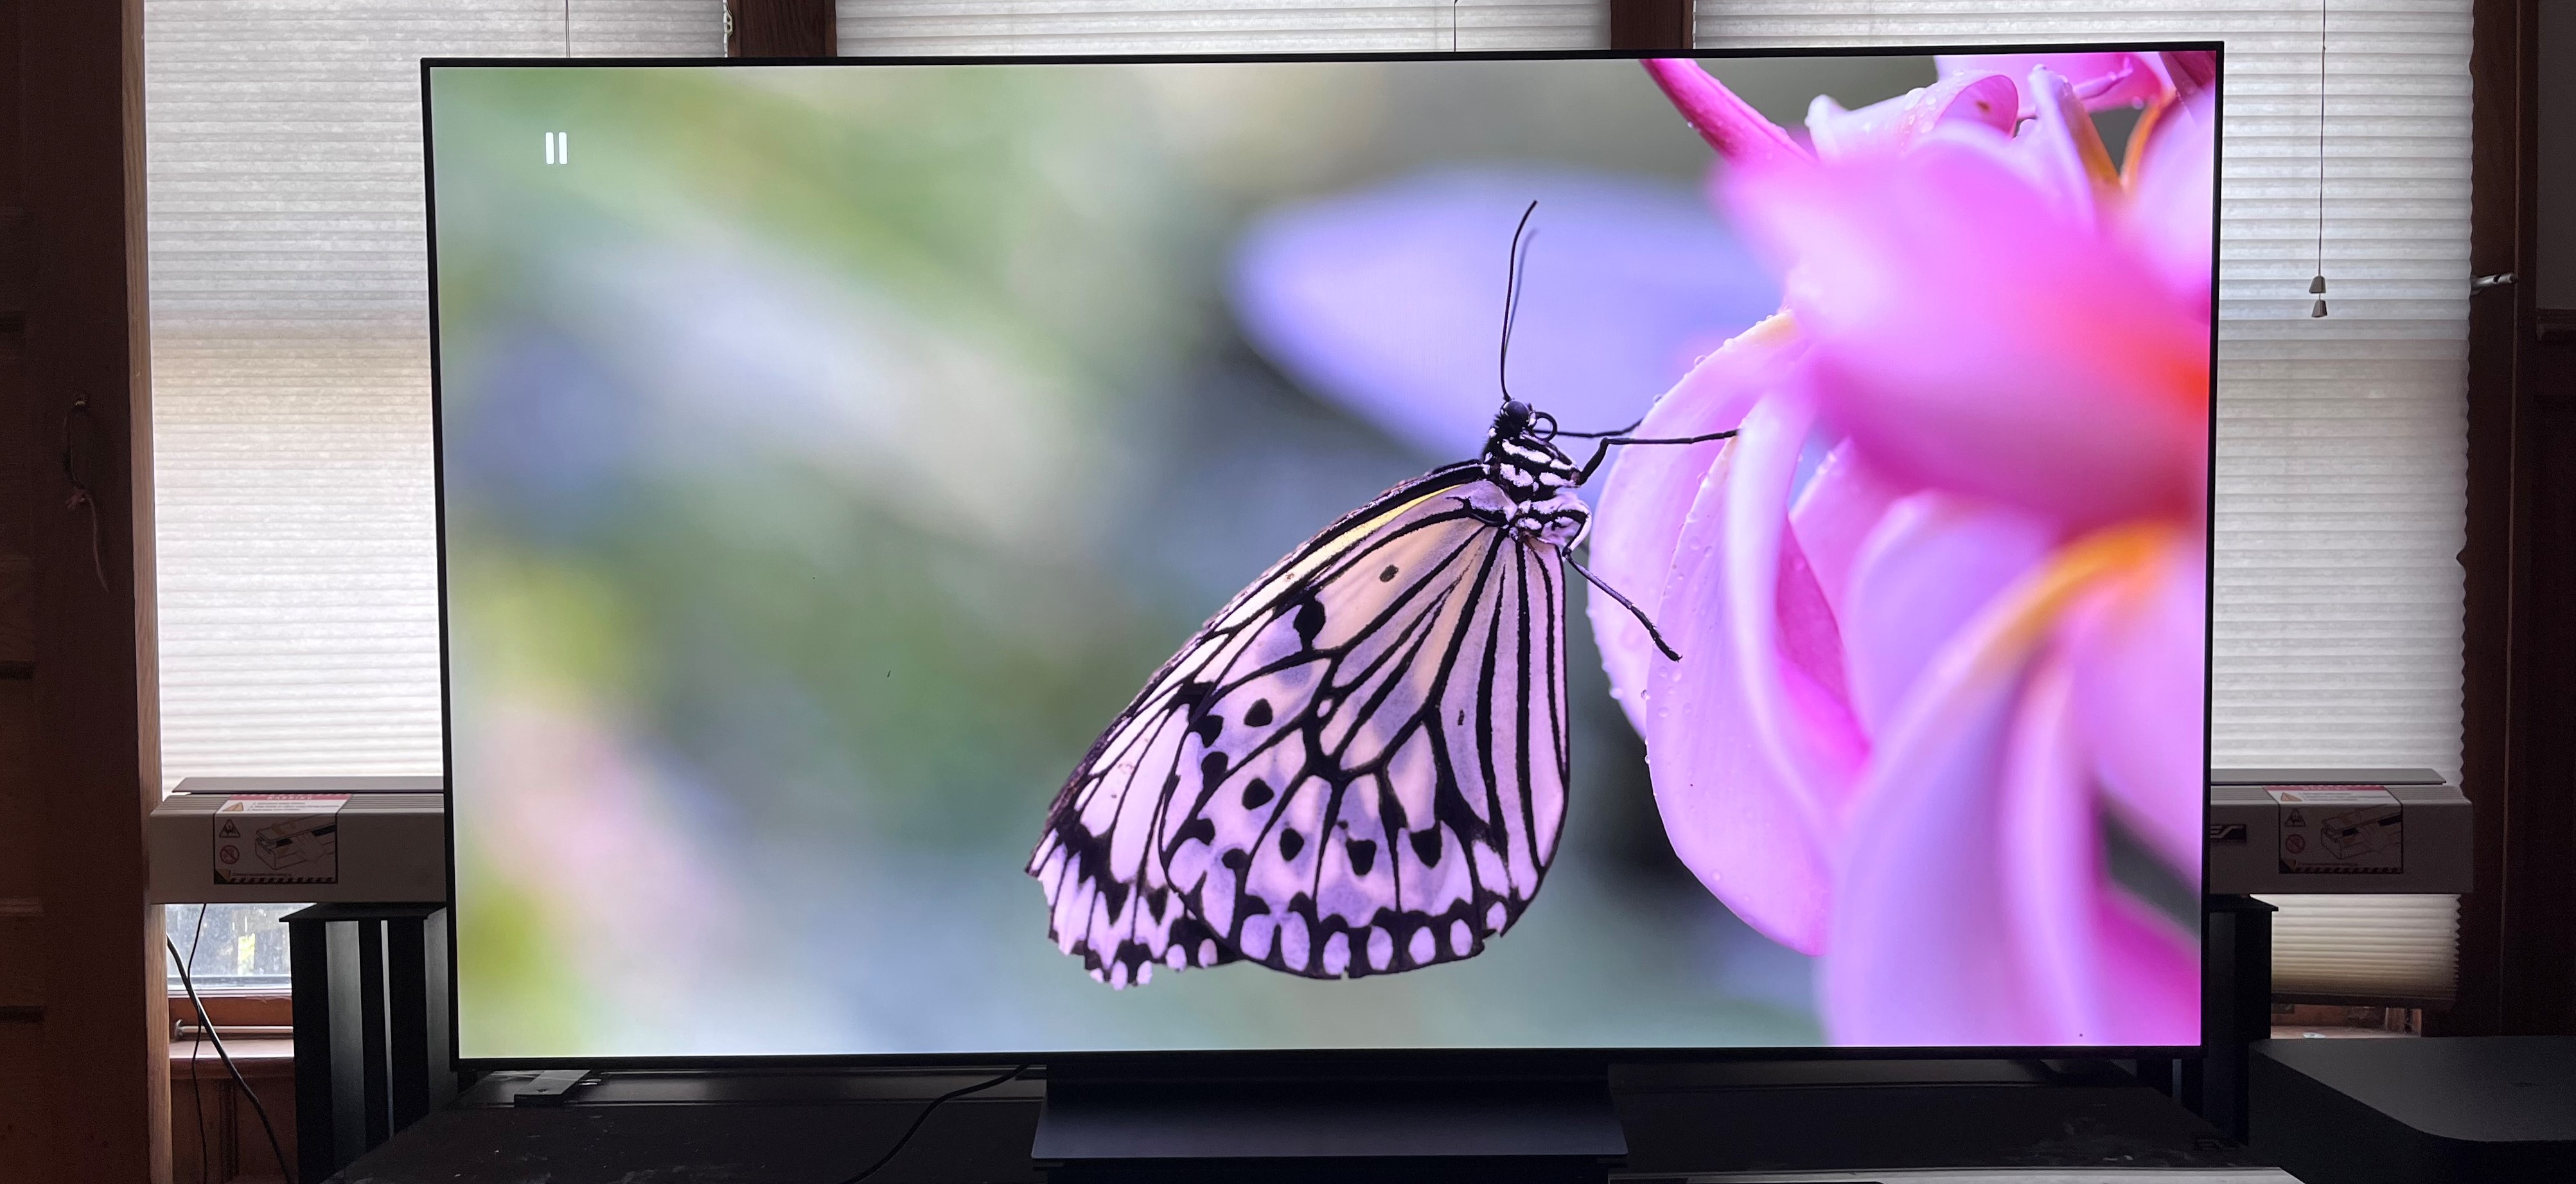 LG TV - How to Use the Game Optimizer